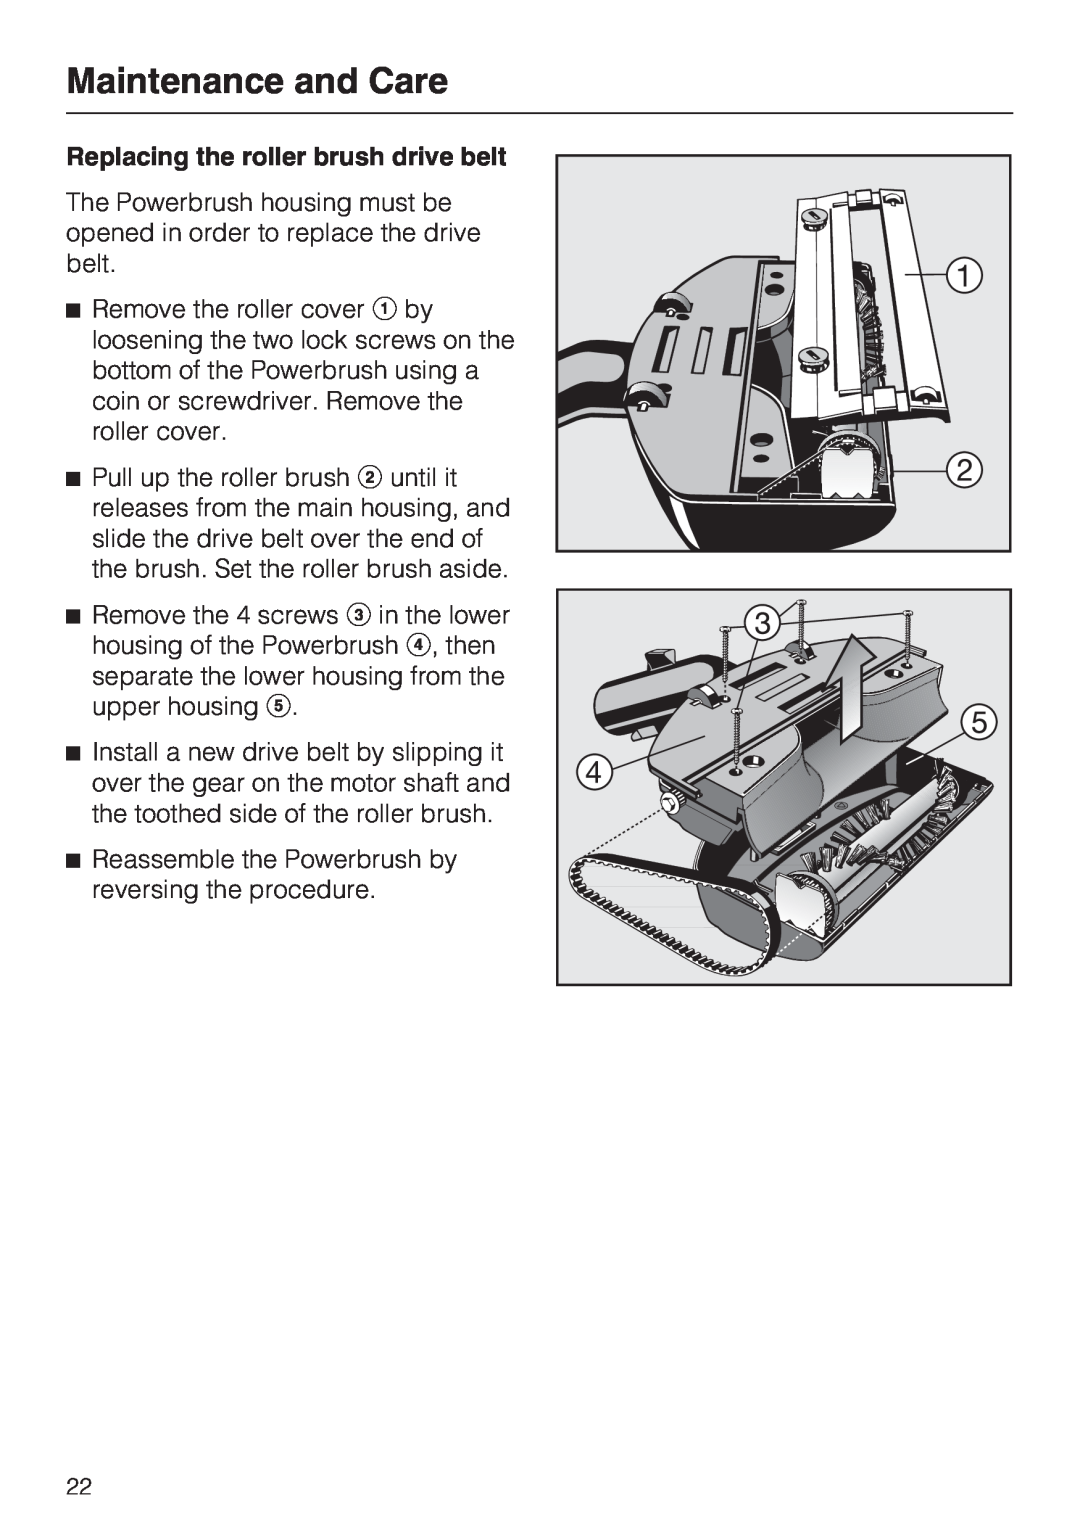 Miele 217-3, 217-2, 213-2 operating instructions Maintenance and Care, Replacing the roller brush drive belt 